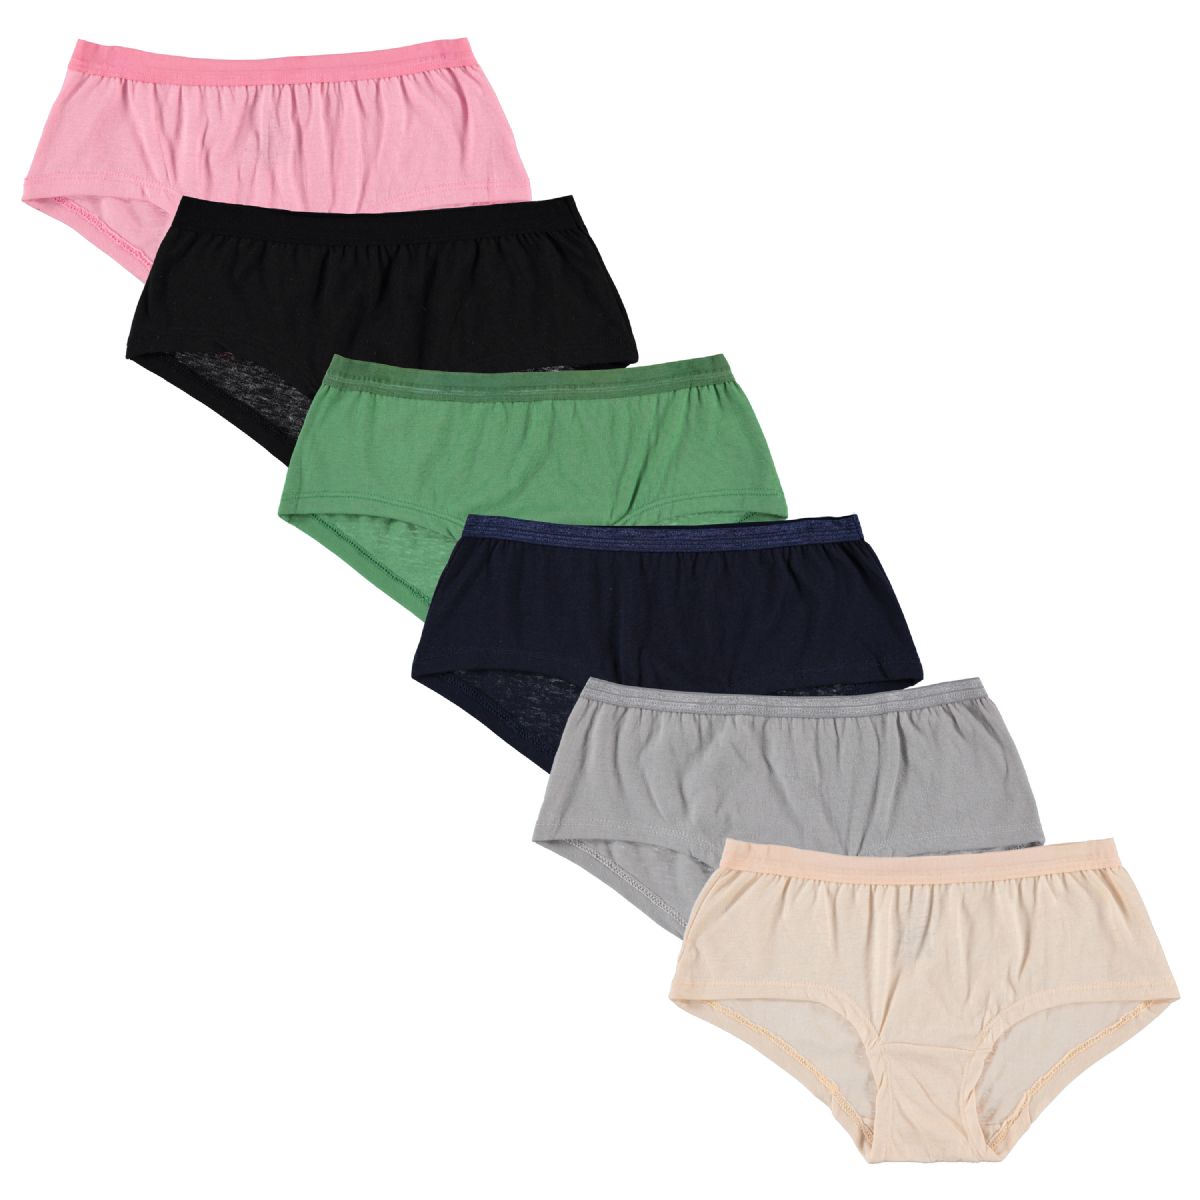 12 Wholesale Yacht & Smith Womens Cotton Blend Underwear In Assorted Colors, Size 2xlarge